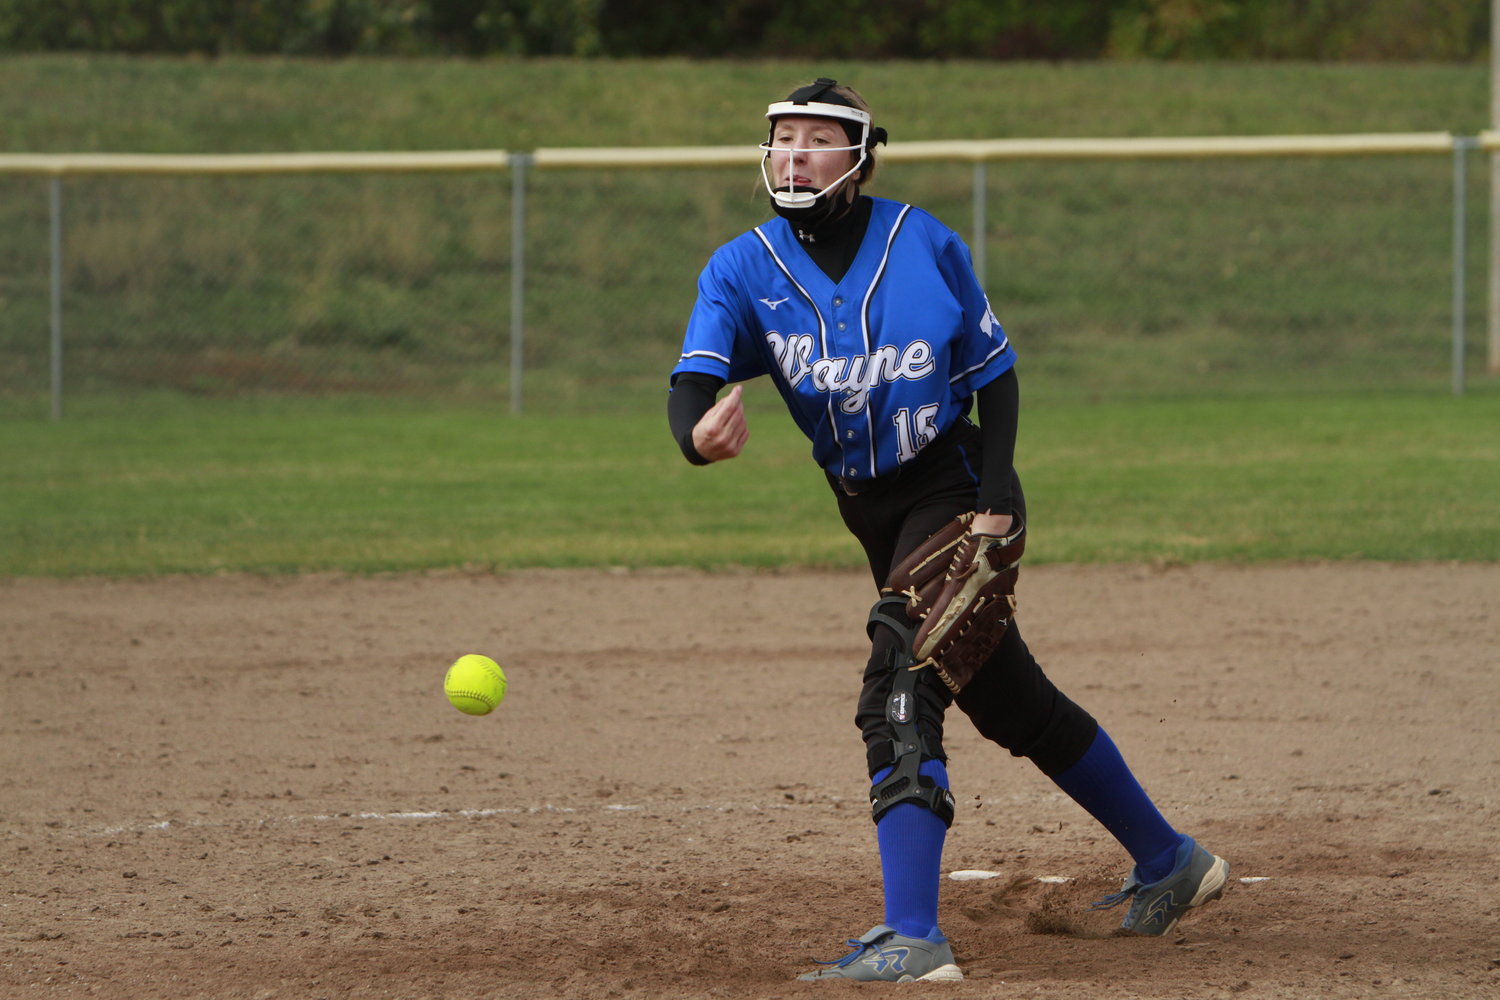 Senior pitcher Kendall Dorey leads eight returning starters back from last year’s Wayne High softball team, which failed to qualify for state for only the second time in the team’s 19-year history.